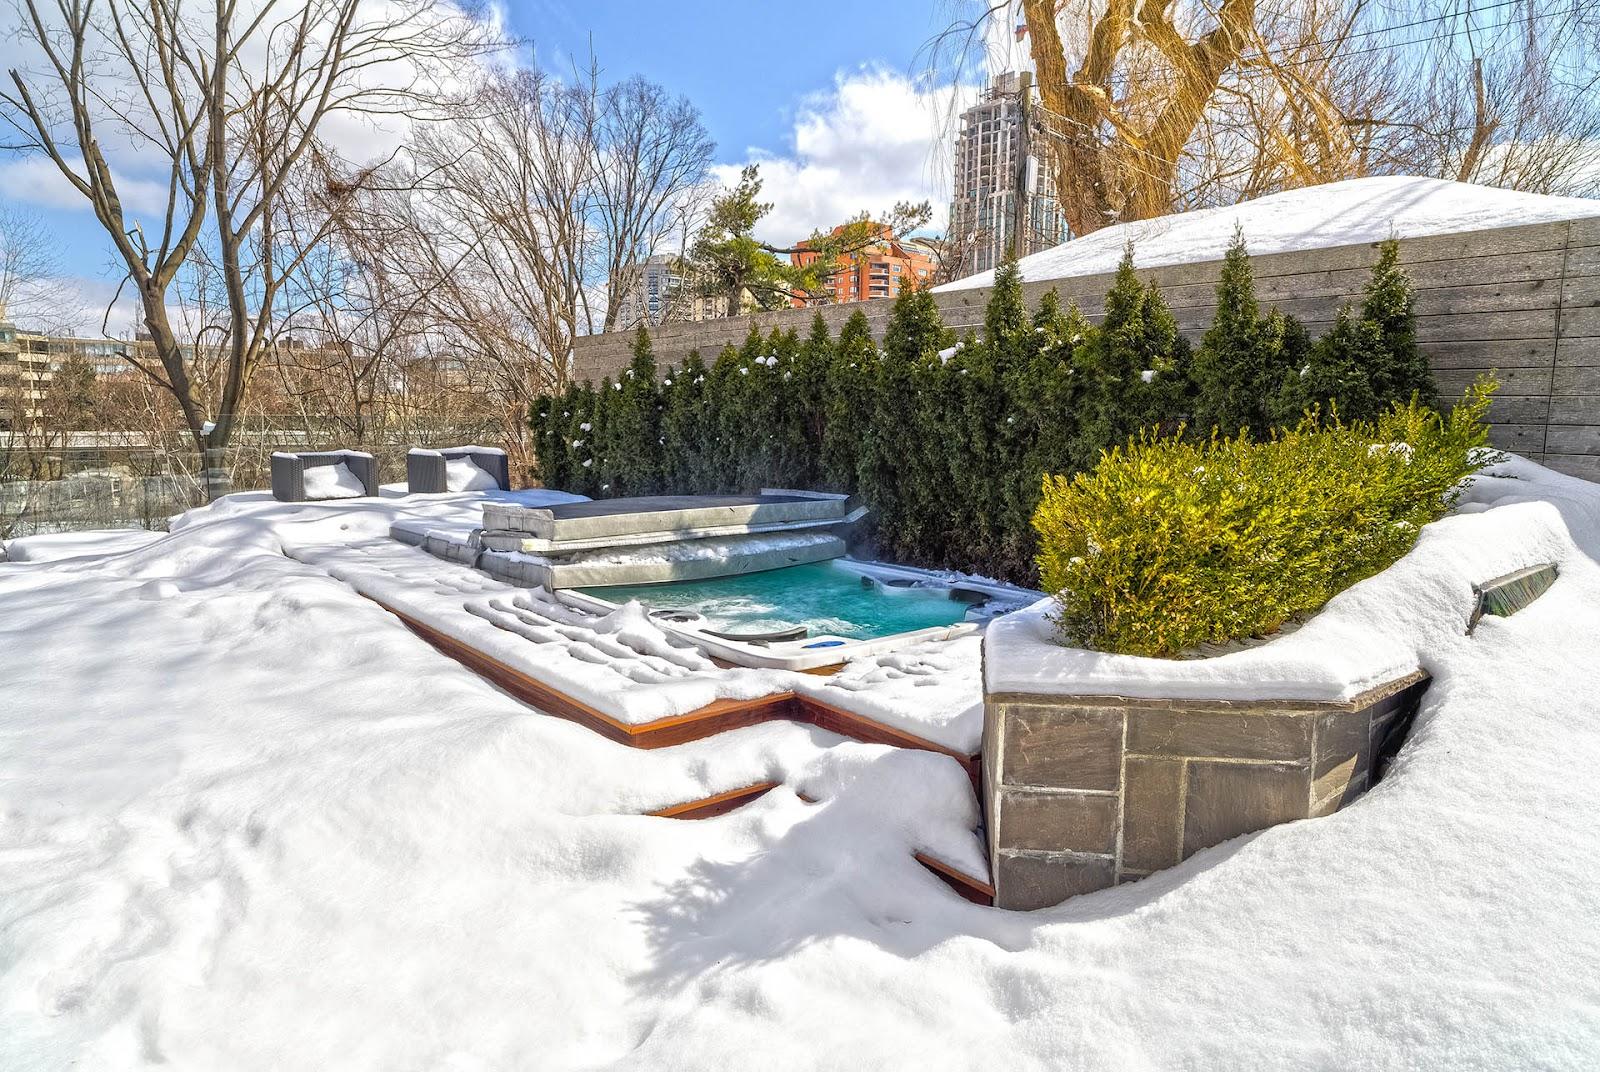 8 Reasons a Swim Spa is Perfect for Winter